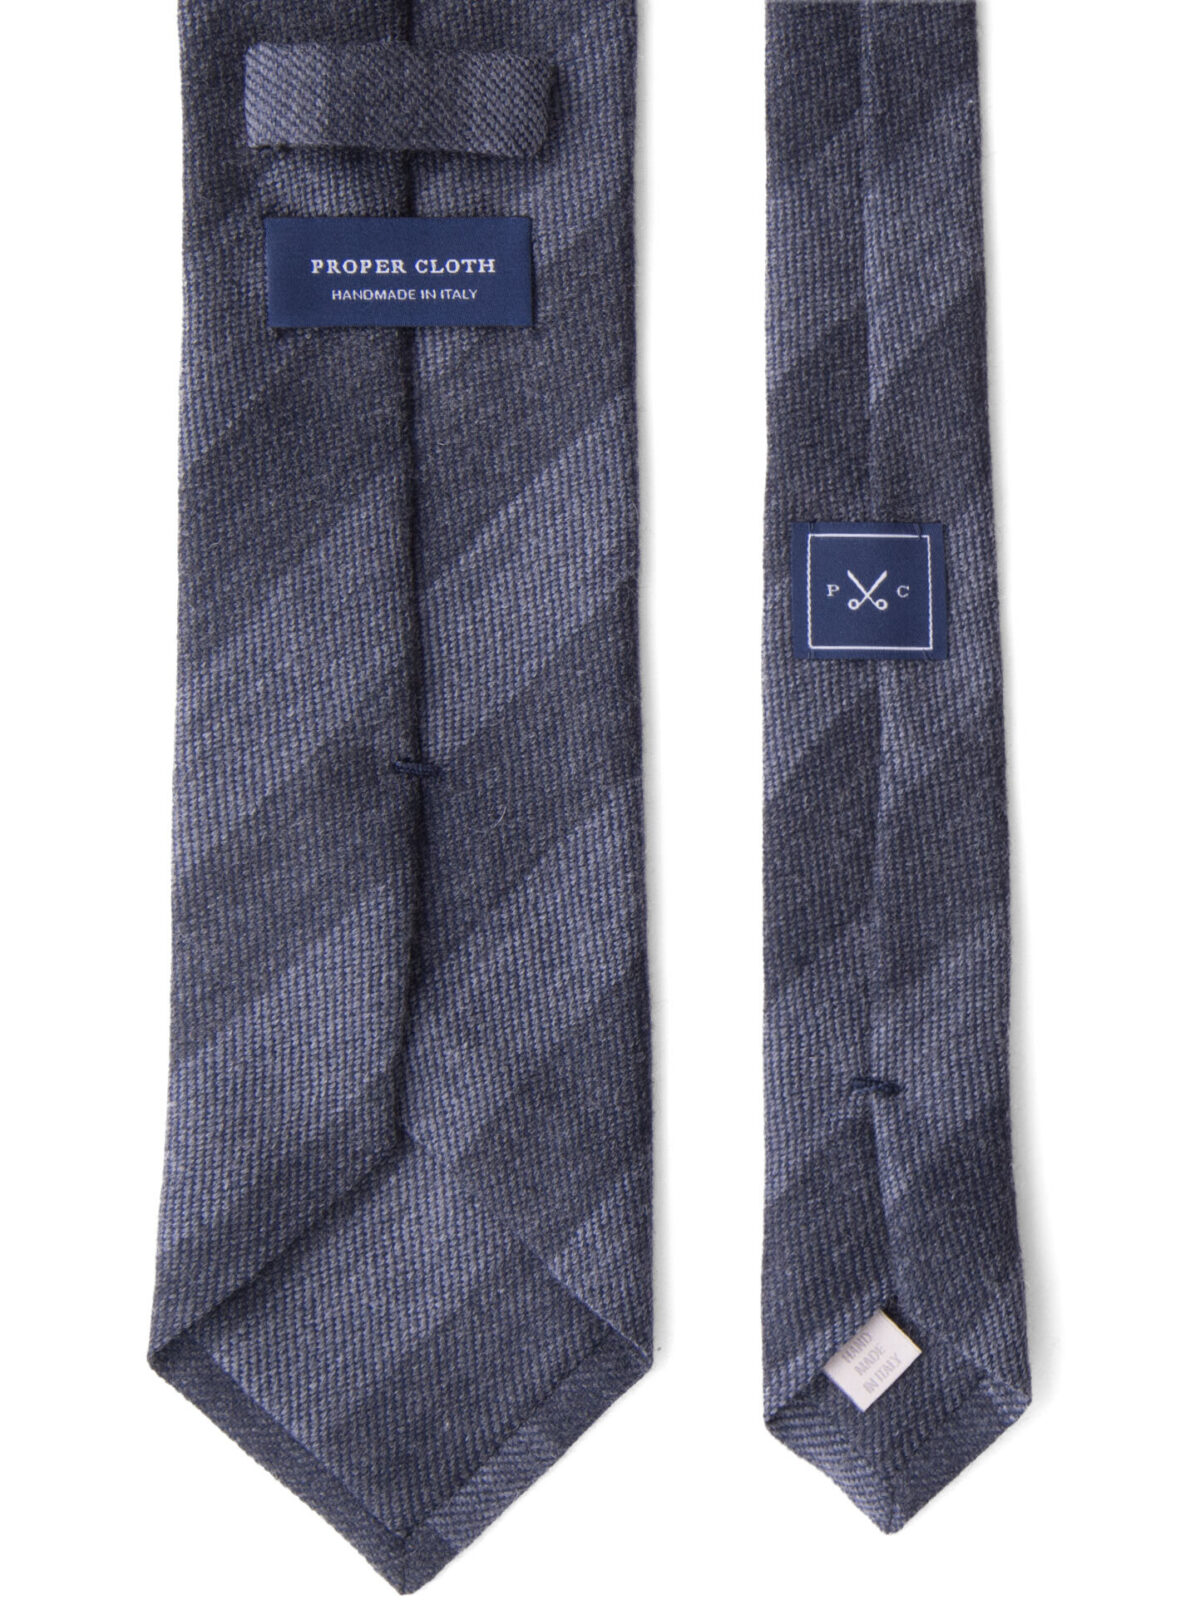 Charcoal and Grey Wool Striped Tie